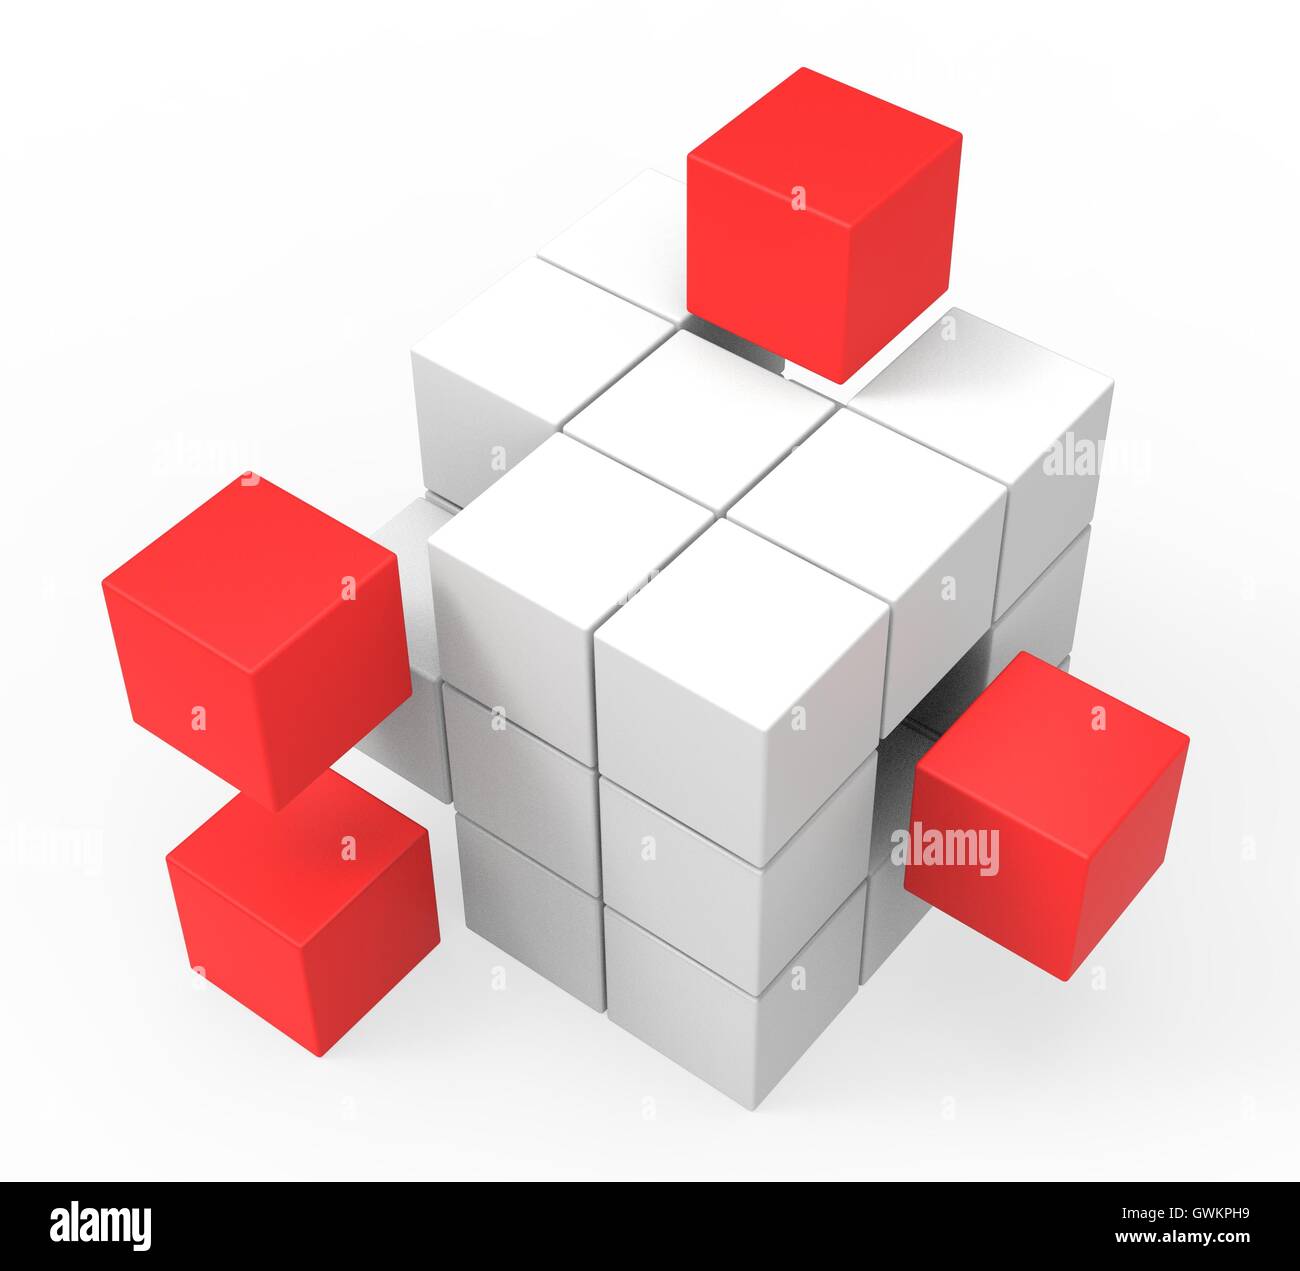 Incomplete Puzzle Shows Achievement Or Completion Stock Photo